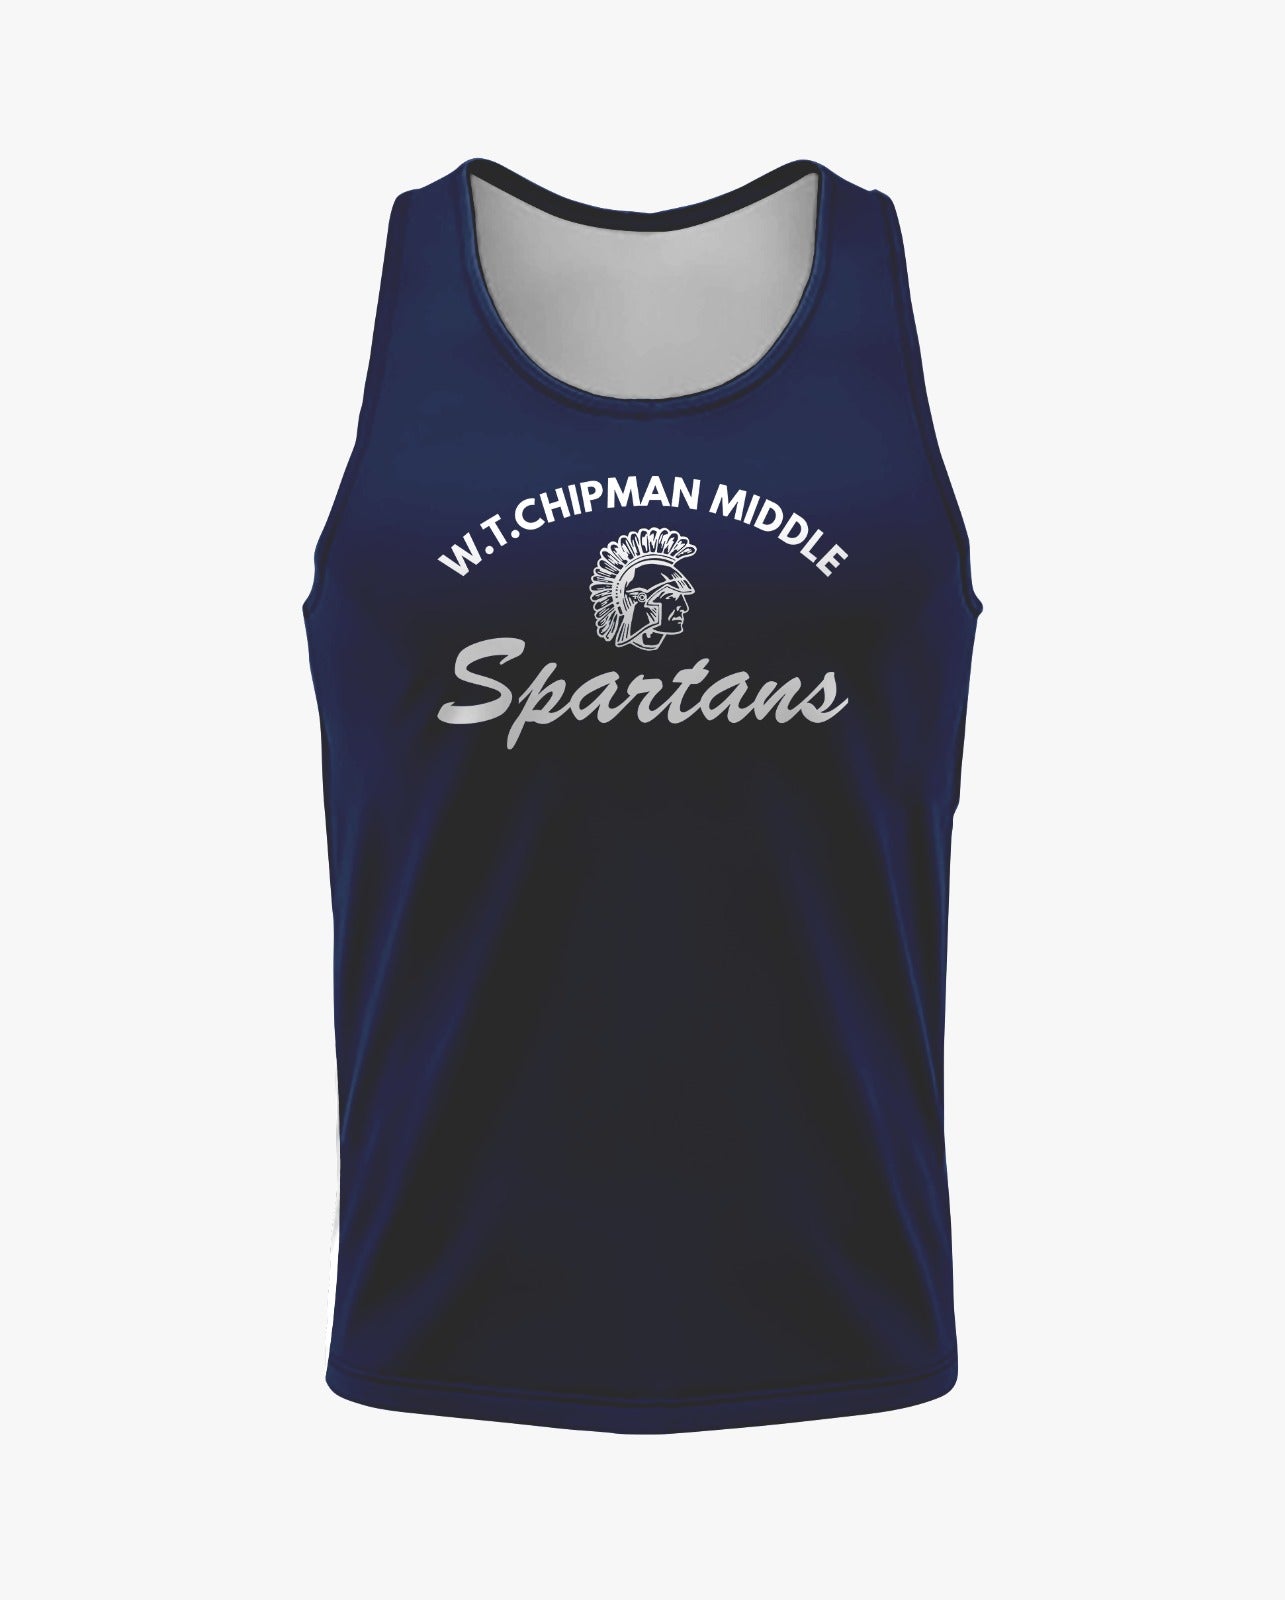 W.T. Chipman Dri Tech Tank Top ~ Spartan Script Navy "Only the Strong are Spartans"